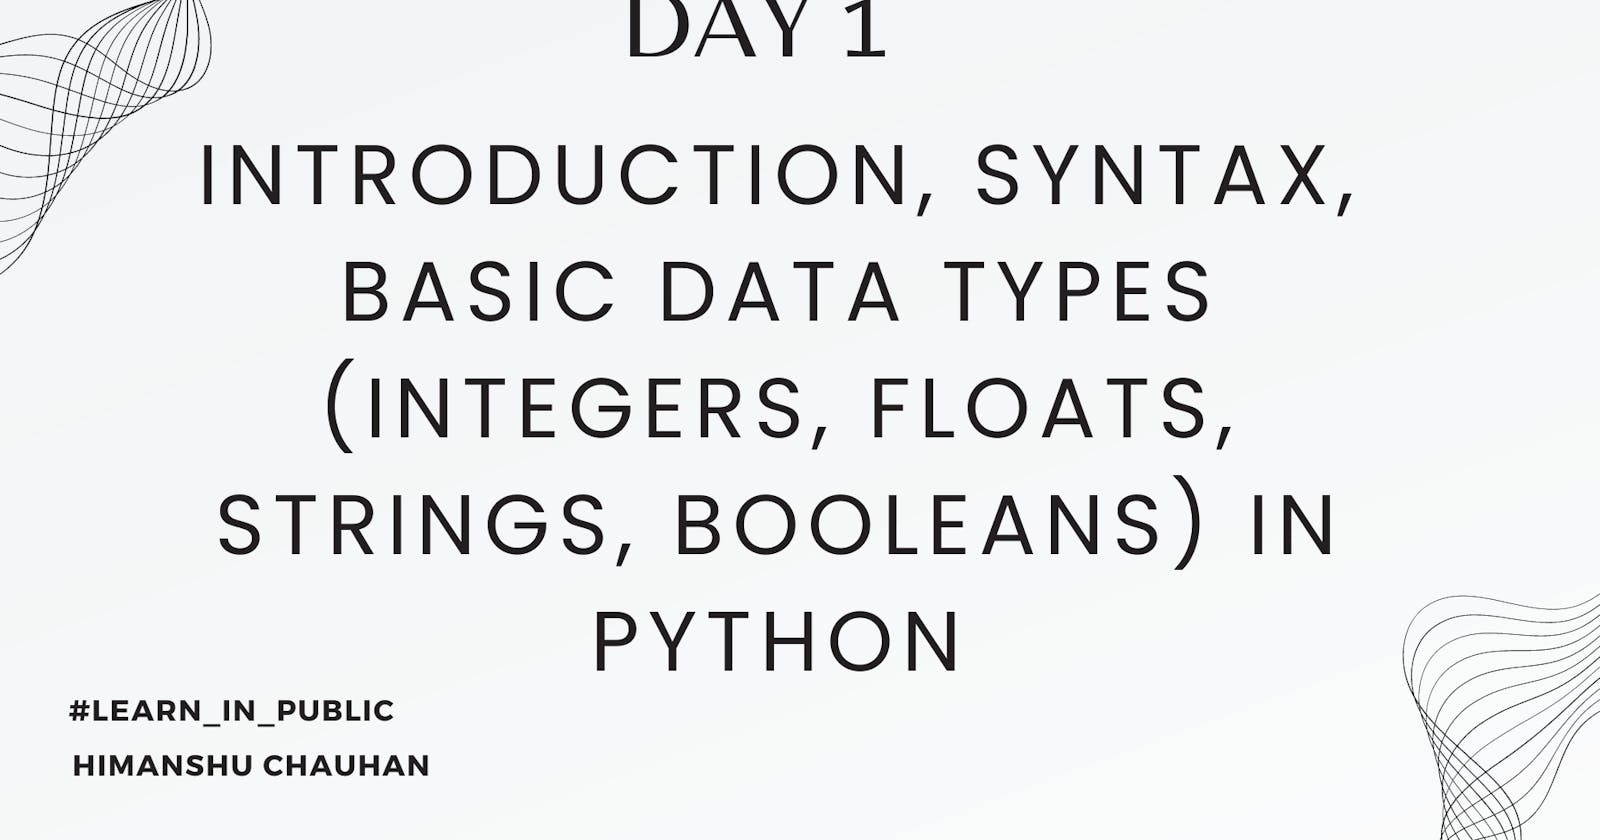 Day 1:Introduction, Syntax, Basic Data Types (integers, floats, strings, booleans)